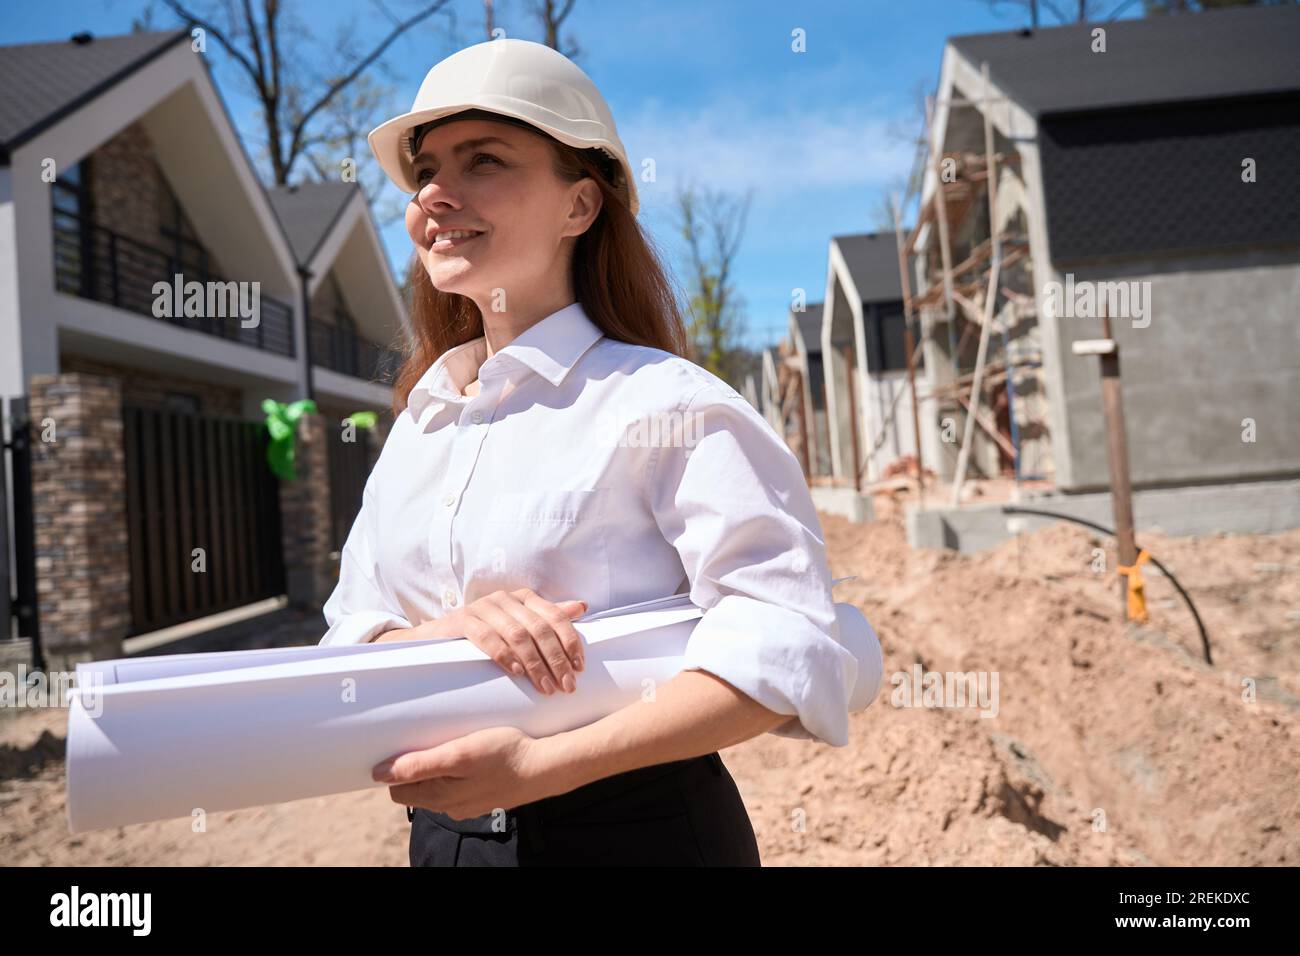 Woman general architect in hardhat coming to construction site with blueprints Stock Photo